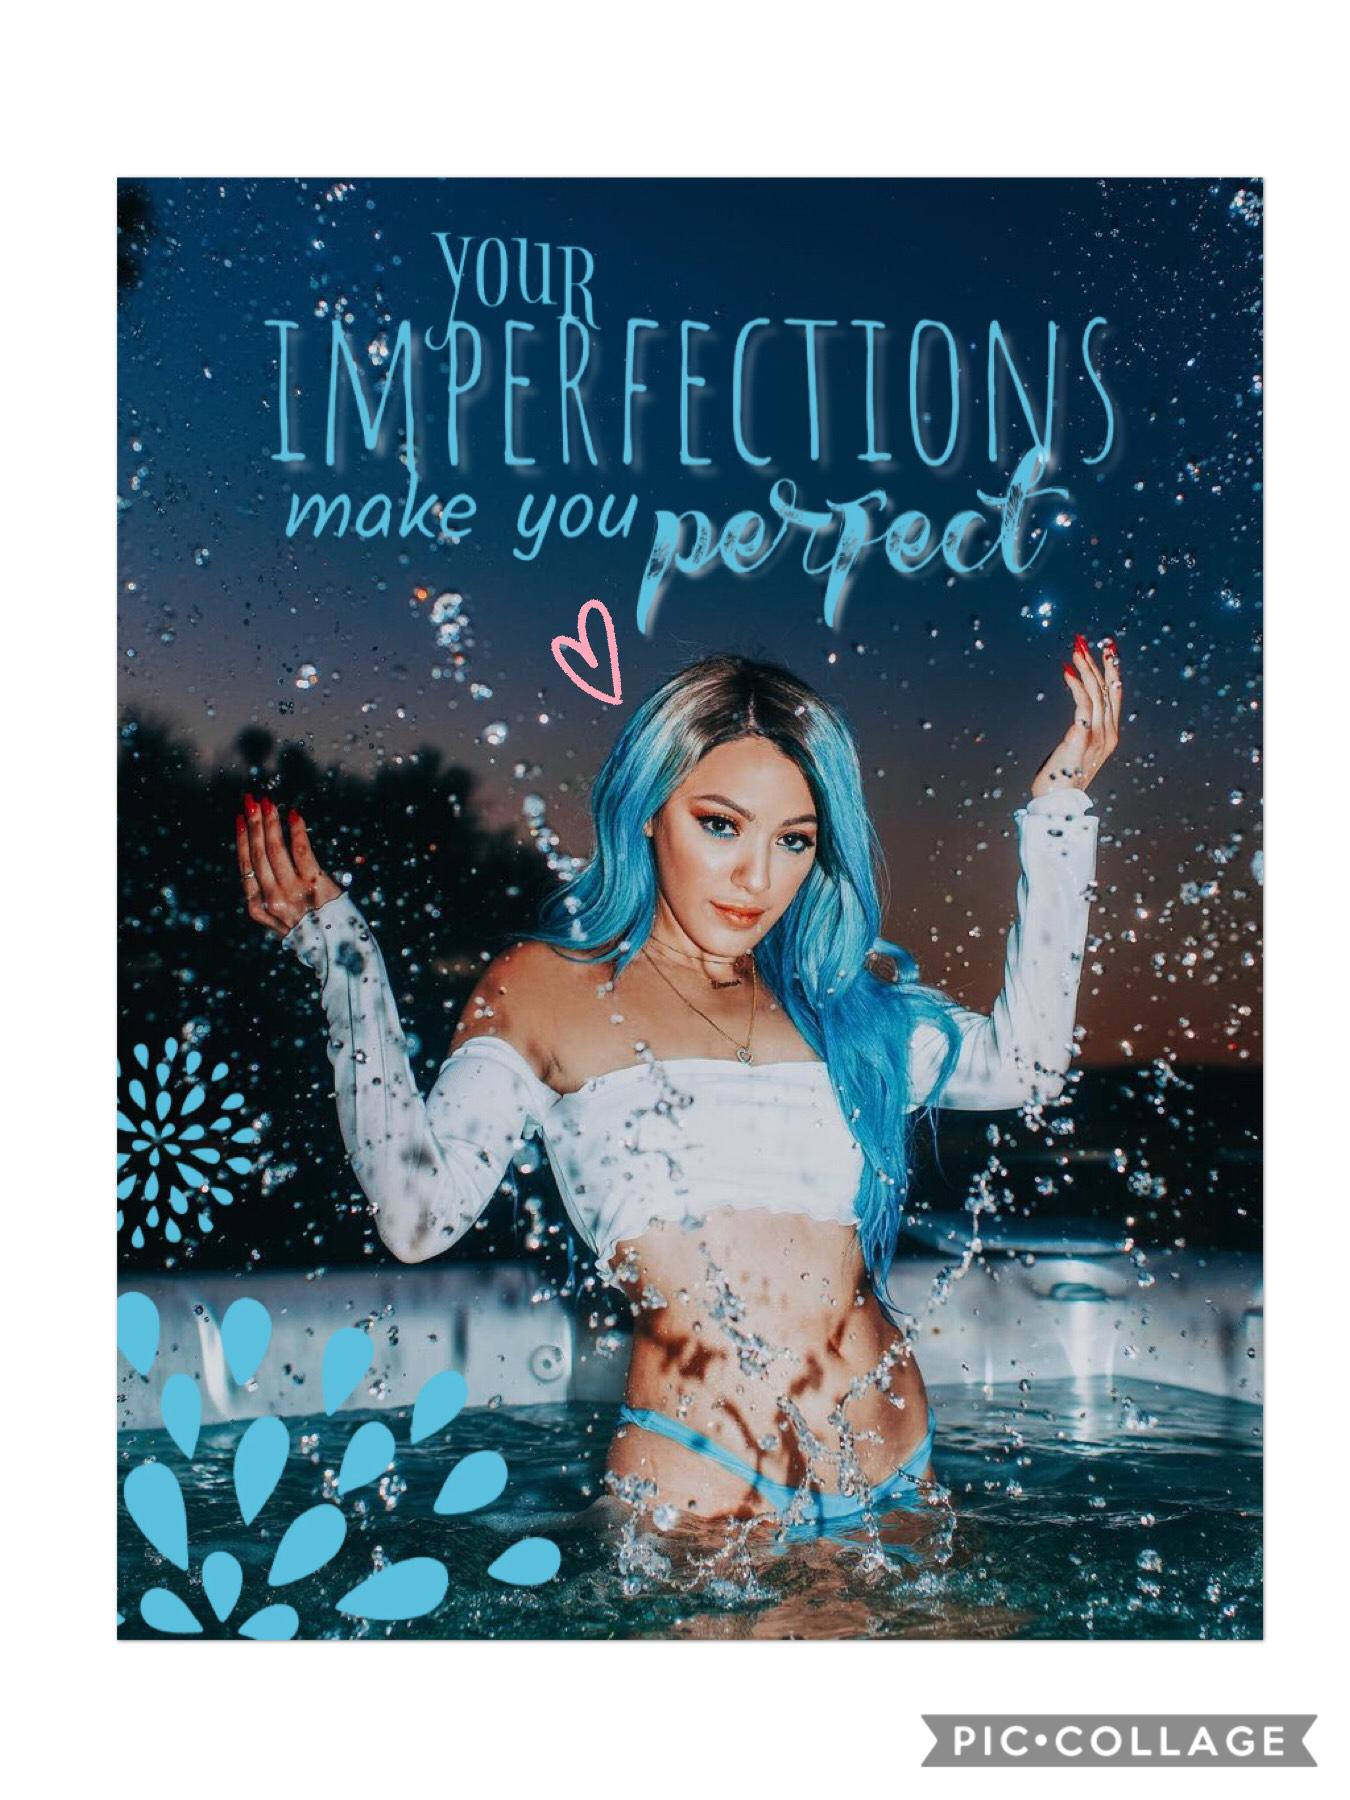 🌟tapppppy🌟
I made this in the car and couldn’t think of a quote - I’ve had John Legend’s “All of Me” stuck in my head for DAYS! This was inspired by the line “all your perfect imperfections” 😍😊🌟💜